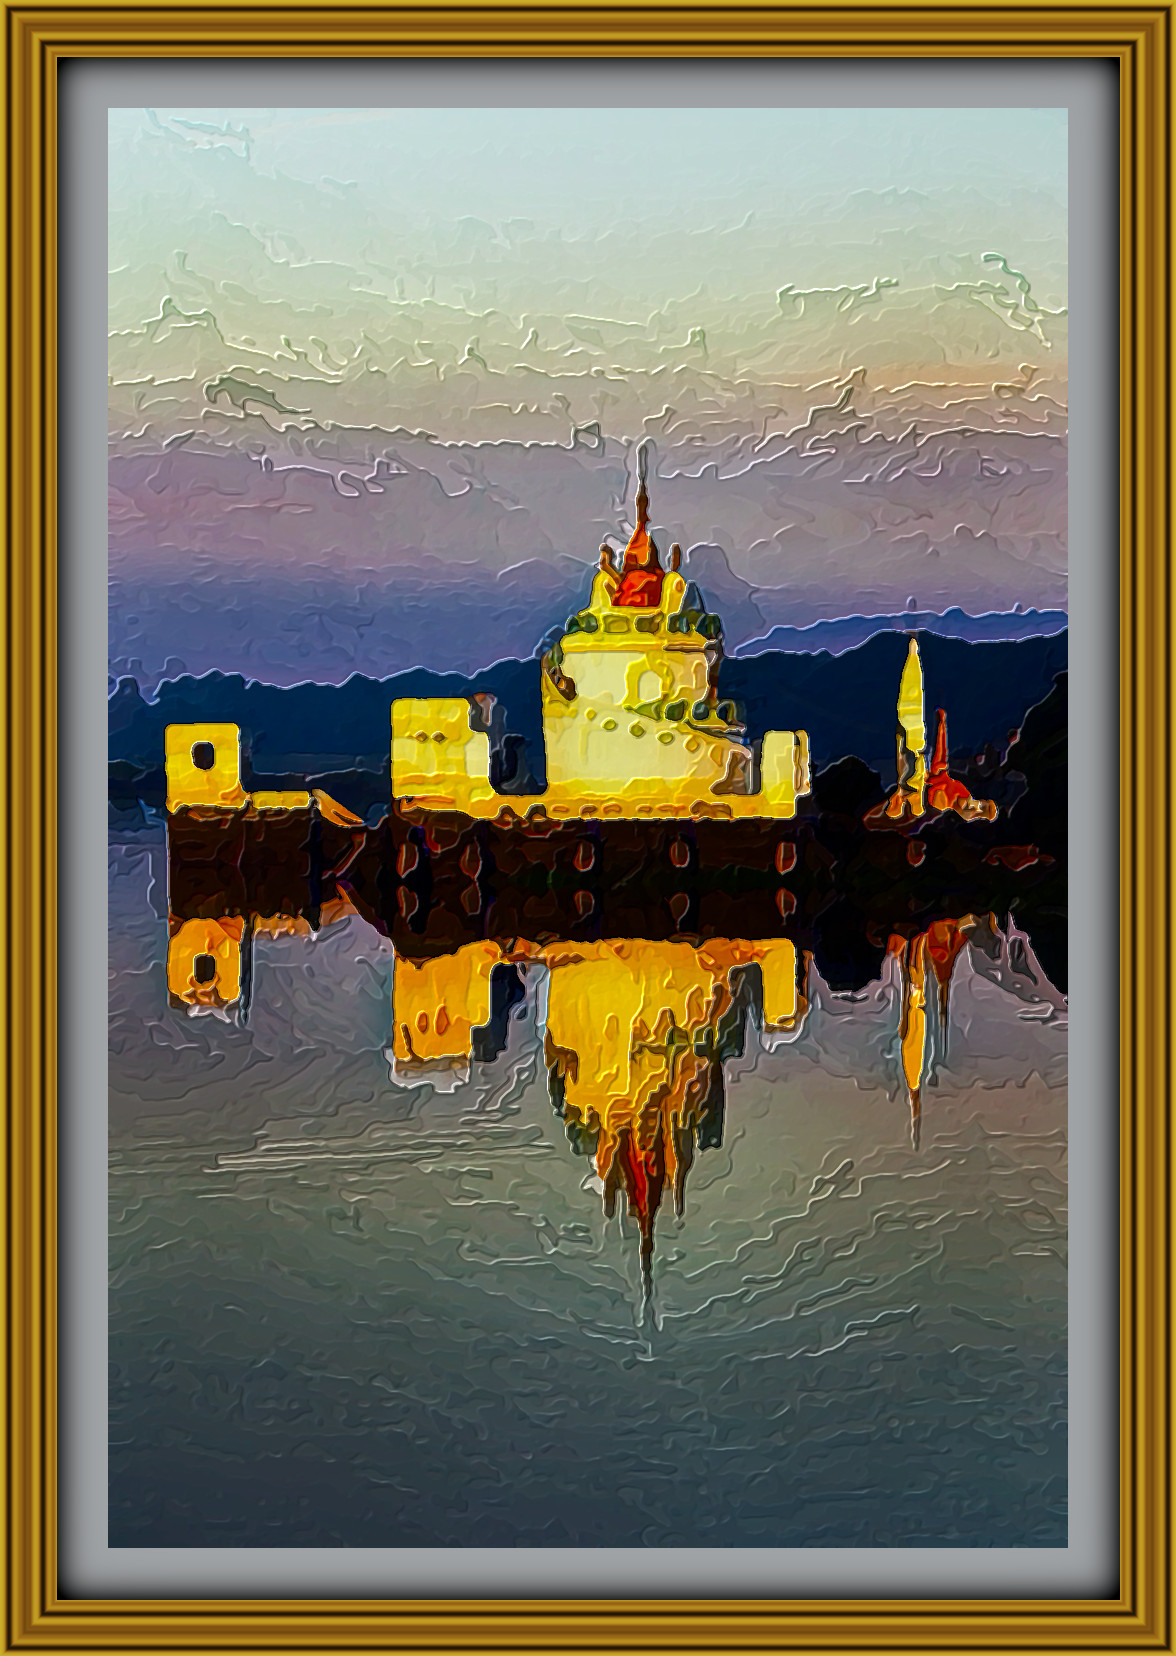 2024-02-15 09-48-41 Temple_Reflections_Taungthaman_Lake_Mandalay_Myanmar_Colby_Brown with JVID Embossed Graphic Effect, parms=1, 127.0, 6.0, 8.0, 7.5, 9.75, 1.5, 0.0, 0.jpeg